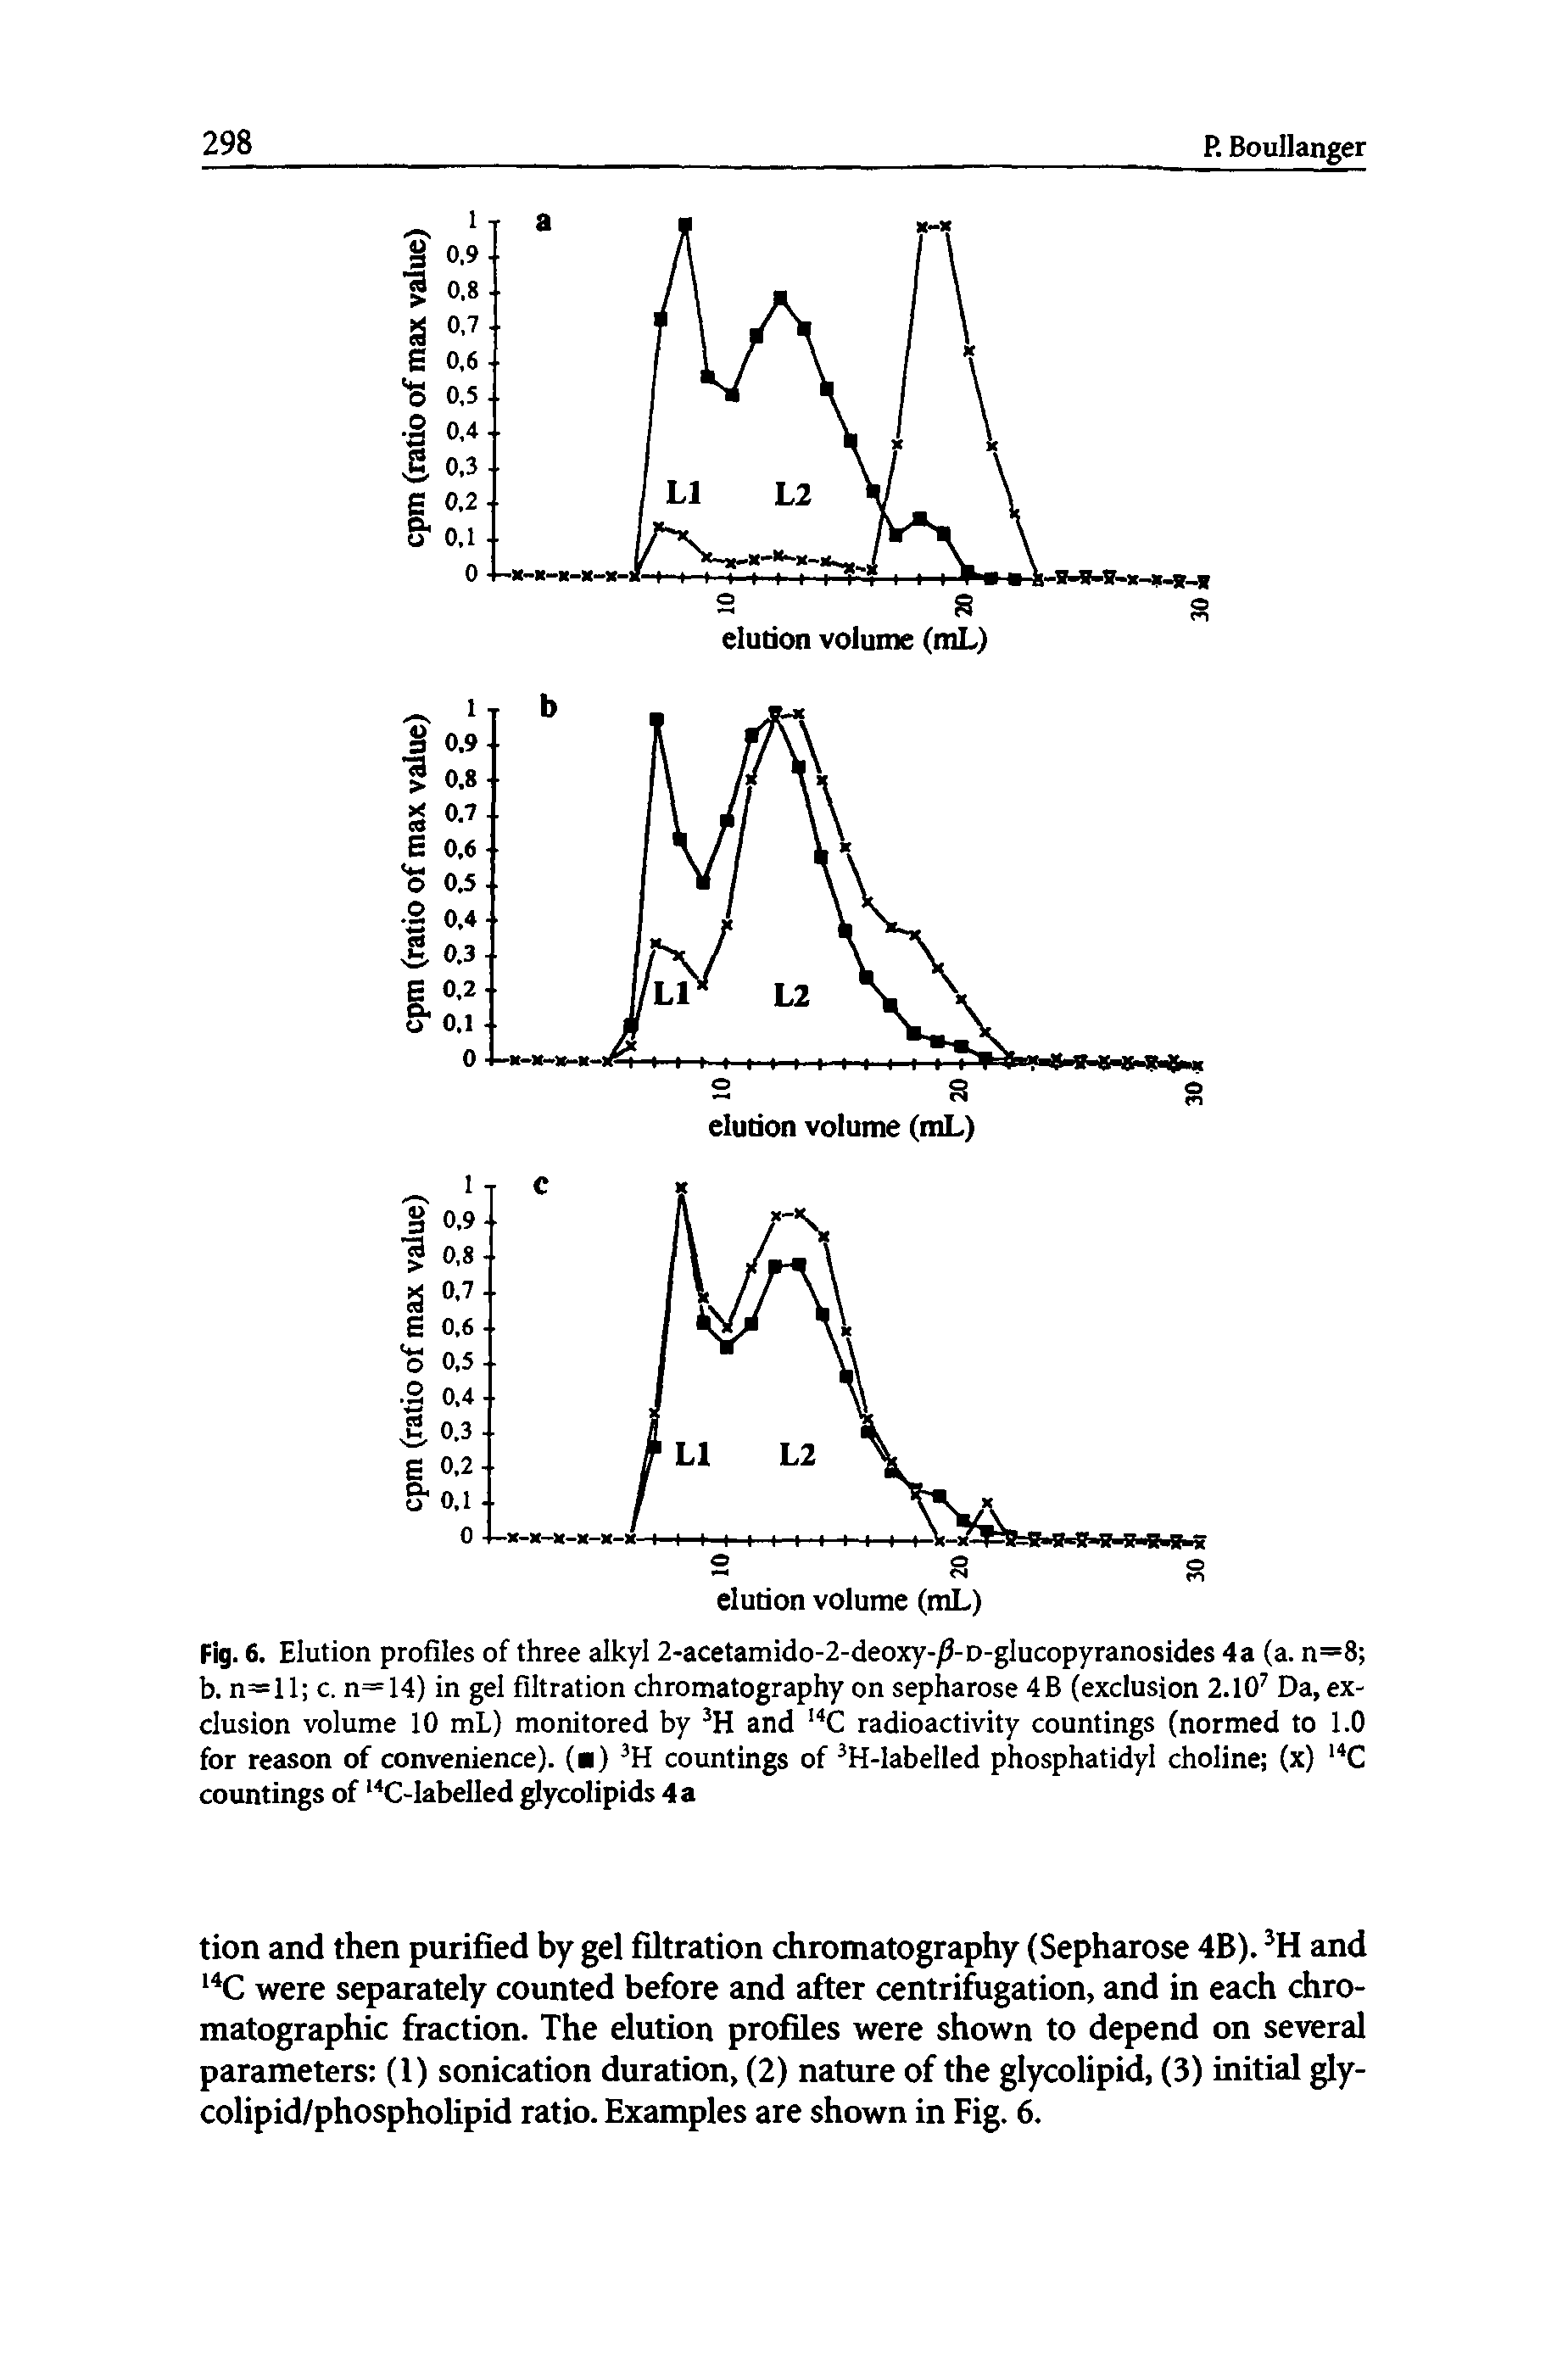 Fig. 6. Elution profiles of three alkyl 2-acetamido-2-deoxy-/ -D-glucopyranosides 4a (a. n=8 b. n=ll c. n=14) in gel filtration chromatography on sepharose 4B (exclusion 2.107 Da, exclusion volume 10 mL) monitored by 3H and I4C radioactivity countings (normed to 1.0 for reason of convenience). ( ) 3H countings of 3H-labelled phosphatidyl choline (x) 14C countings of l4C-labelled glycolipids 4 a...